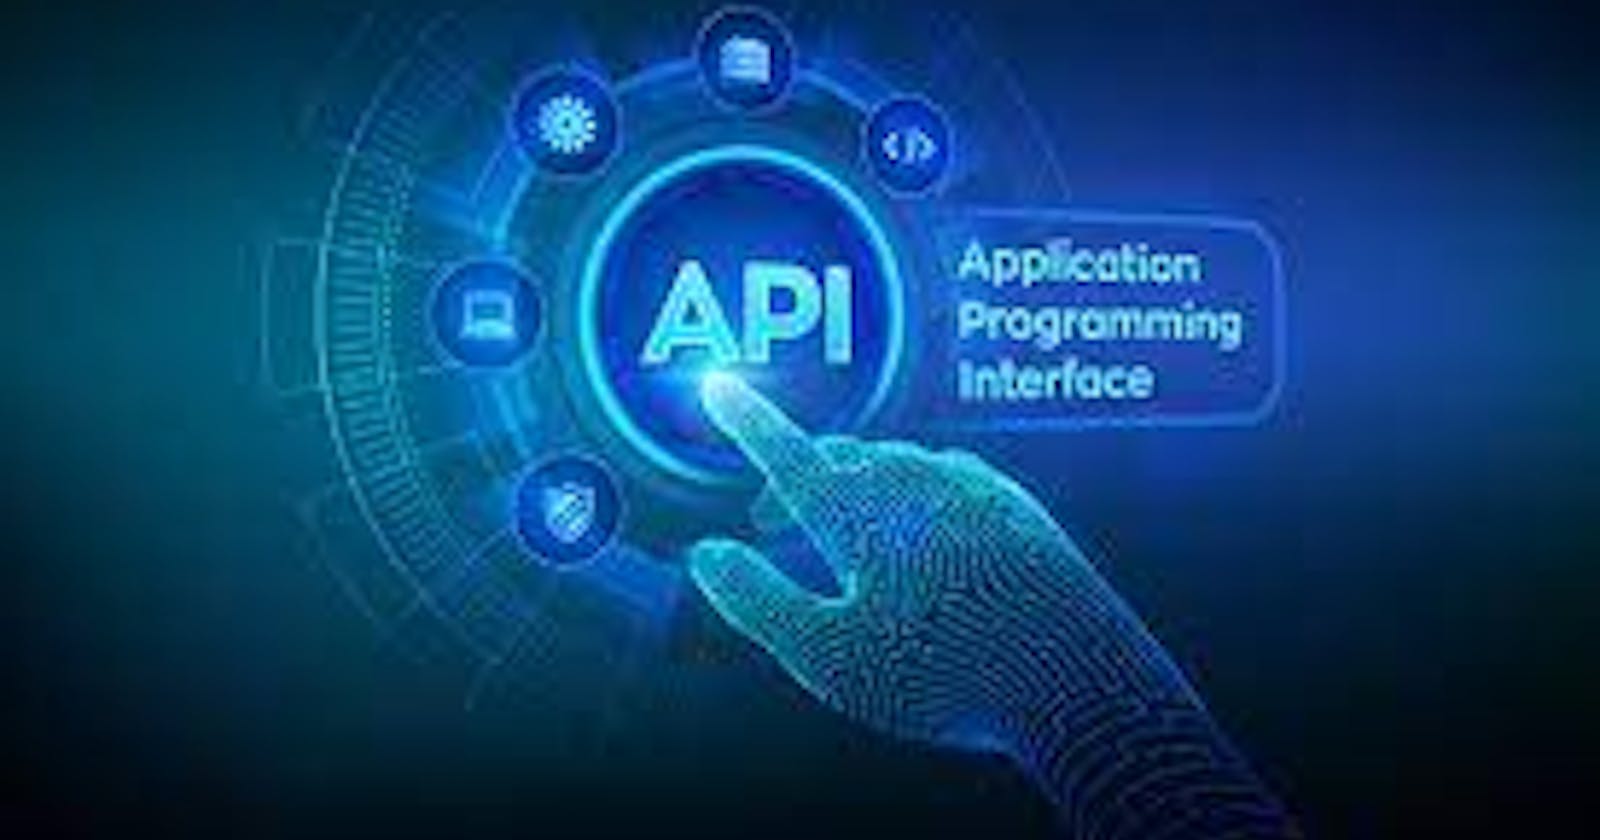 Learn about APIs